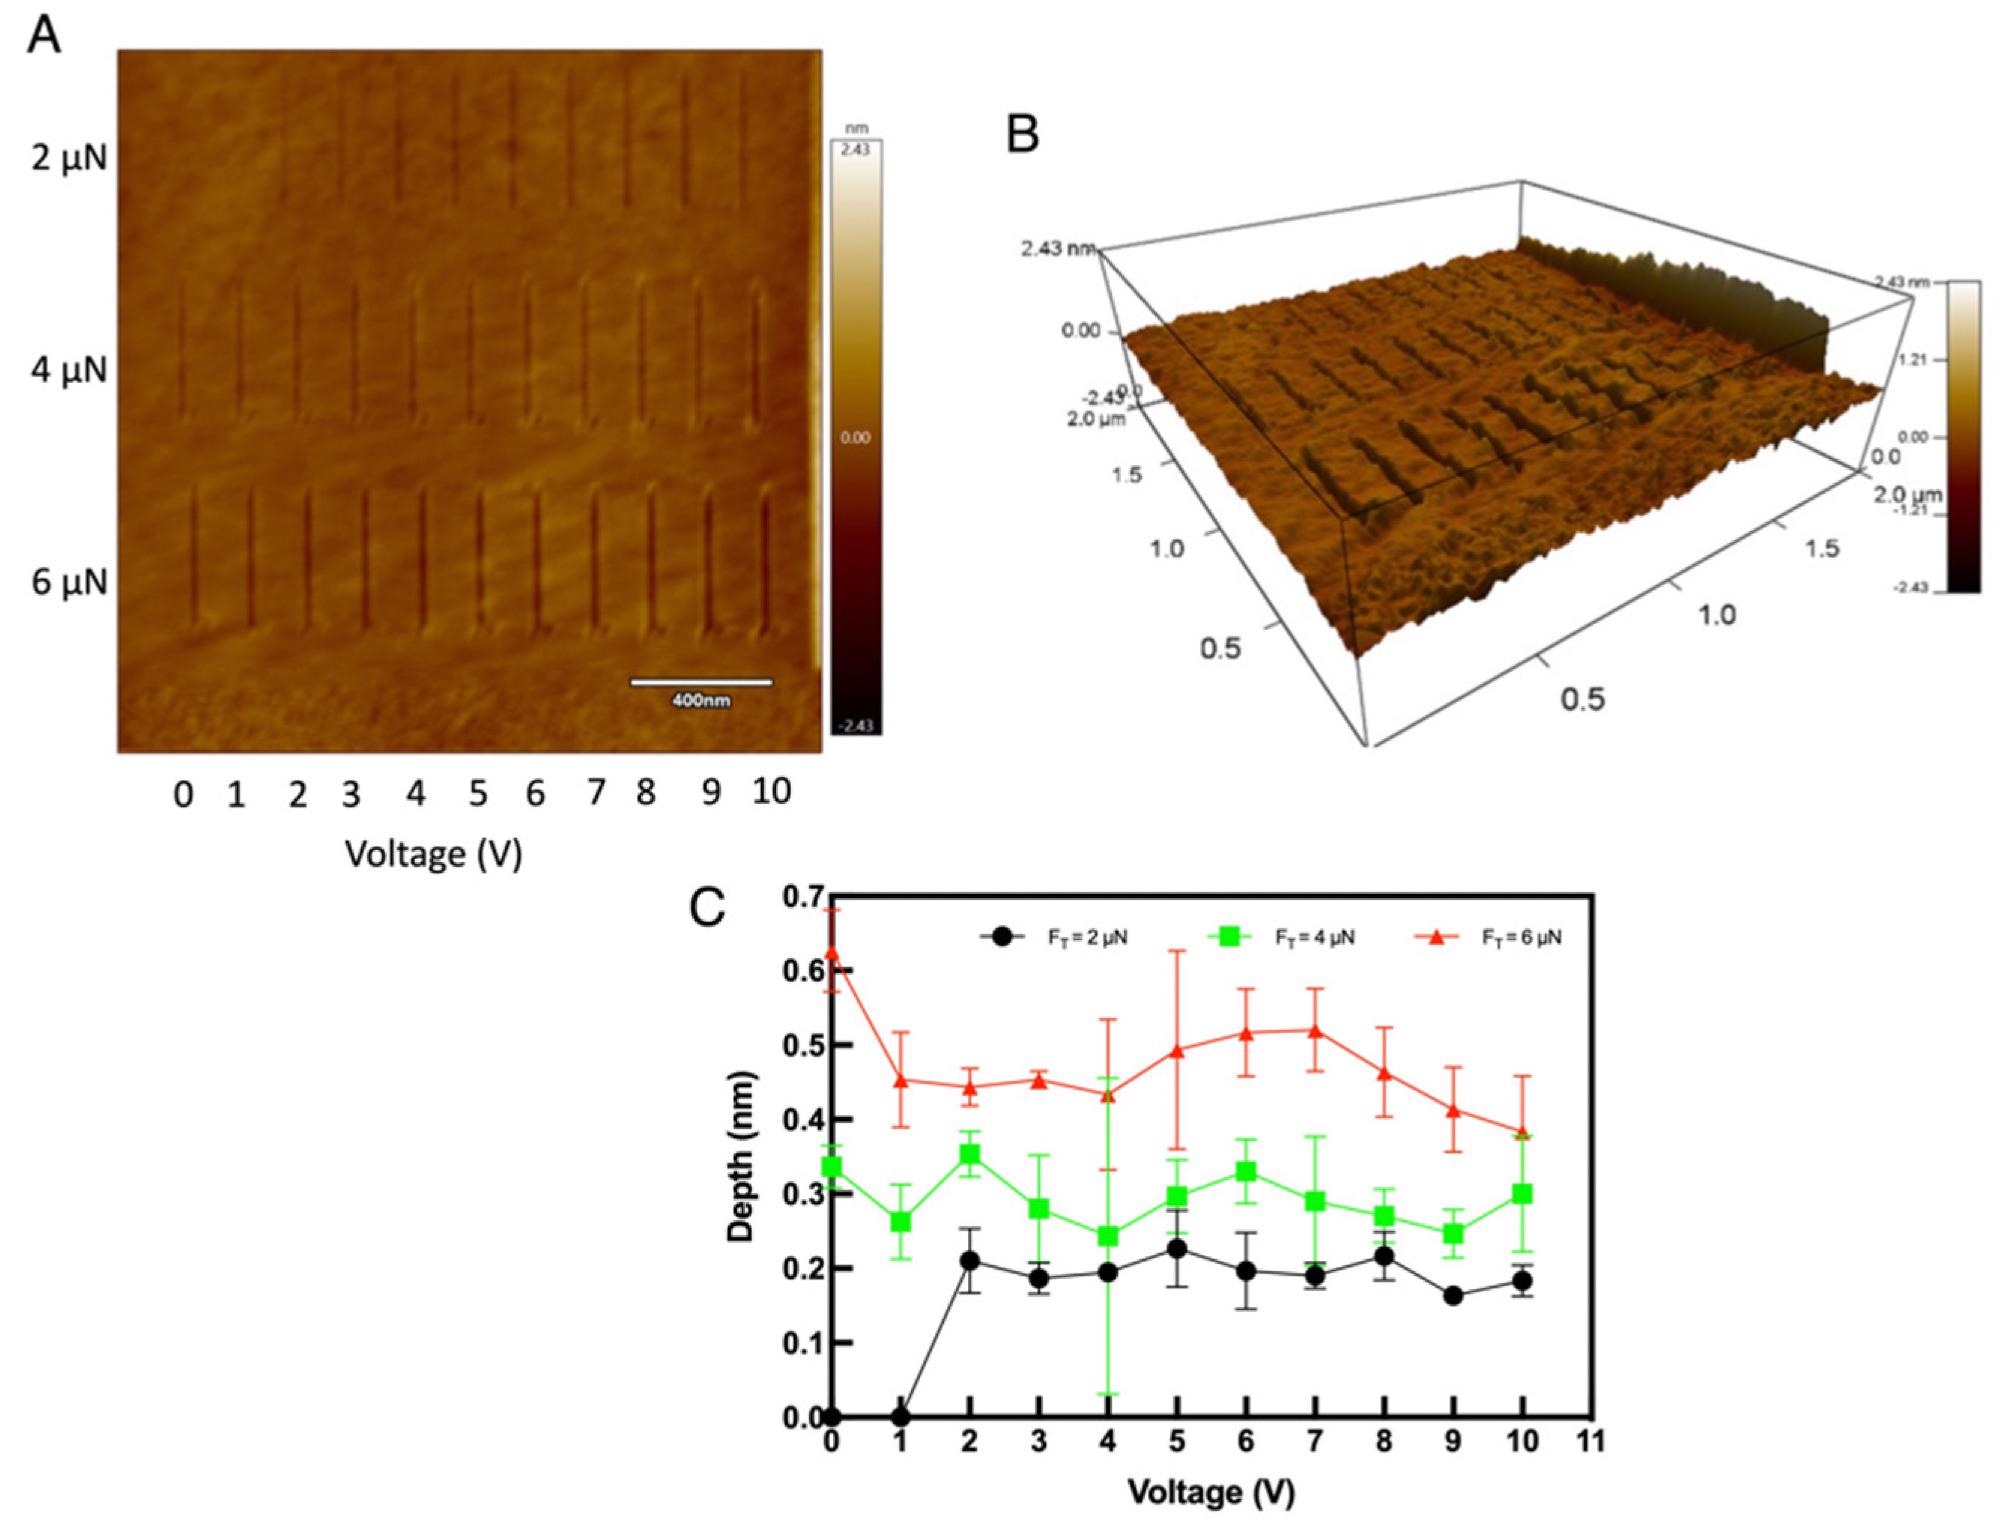 Scratching tests on HF treated silicon: (A) The etched lines on the silicon surface with different forces and voltages (B) The 3D image of the same where the etched depth can be seen increasing with higher force (C) The depth vas voltage graph showing the influence of different tip force.